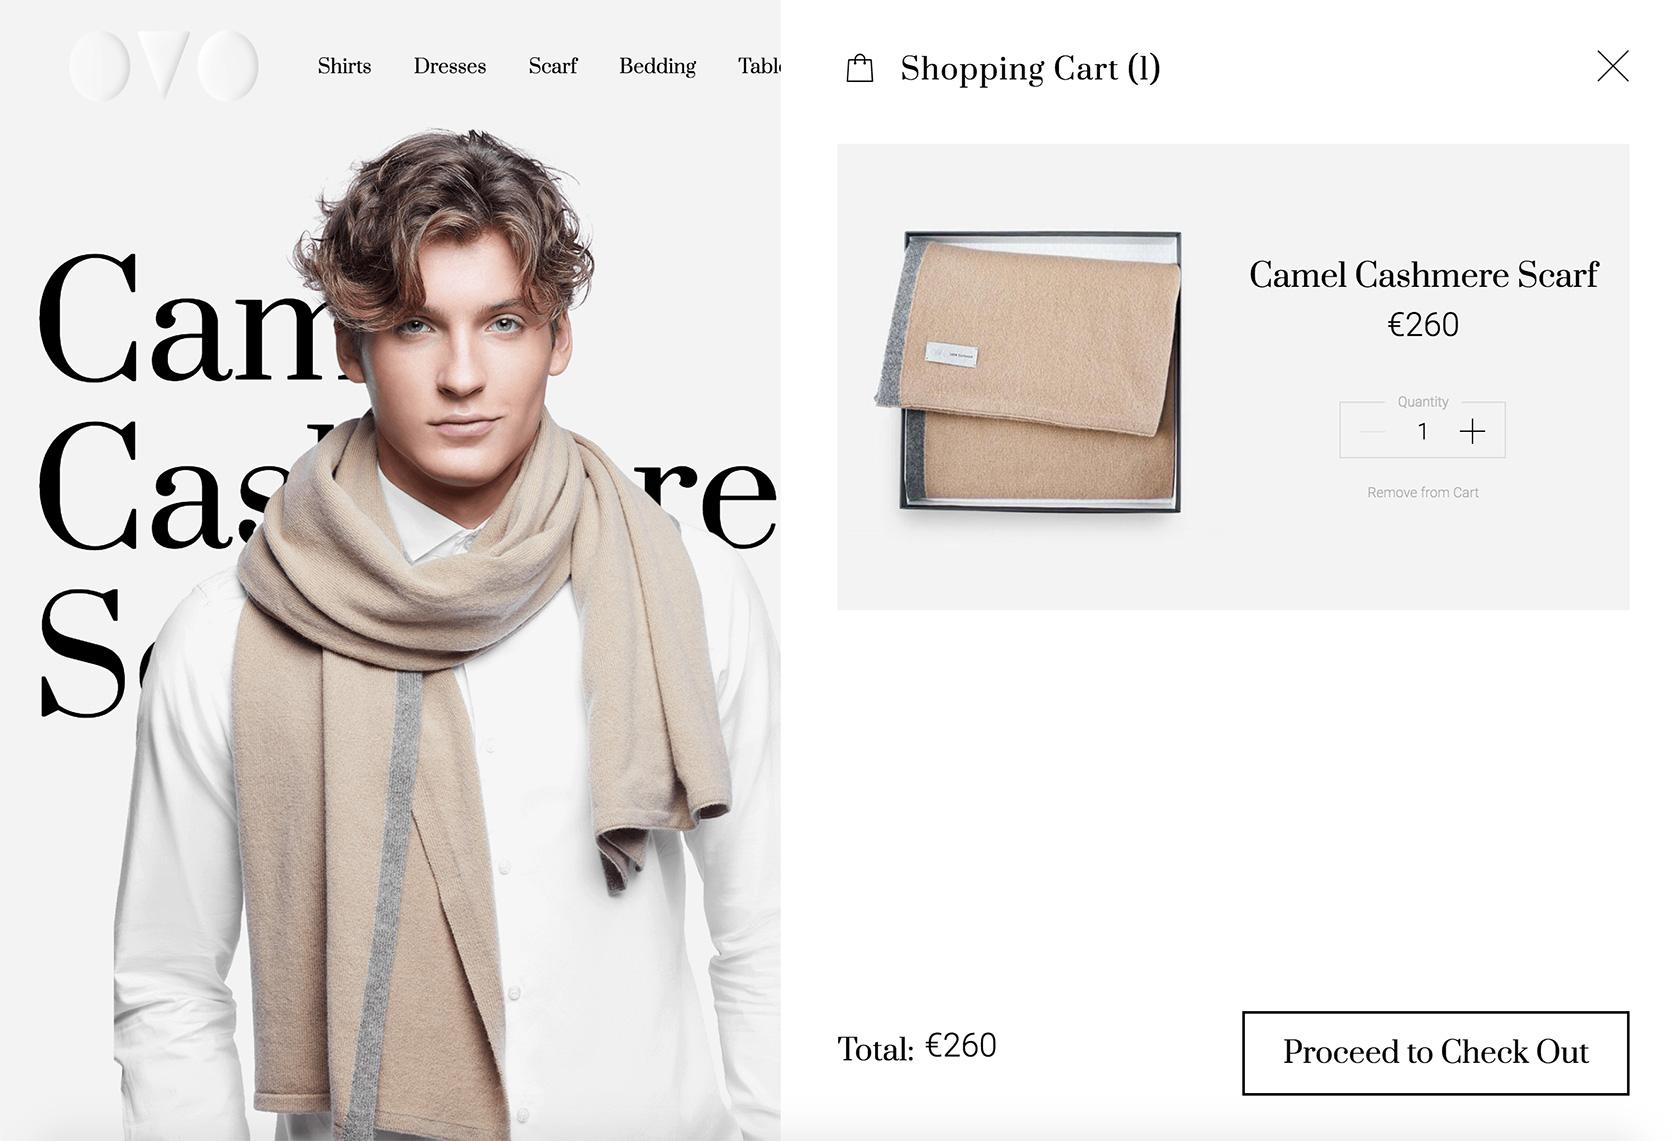 One of the best e-commerce designs